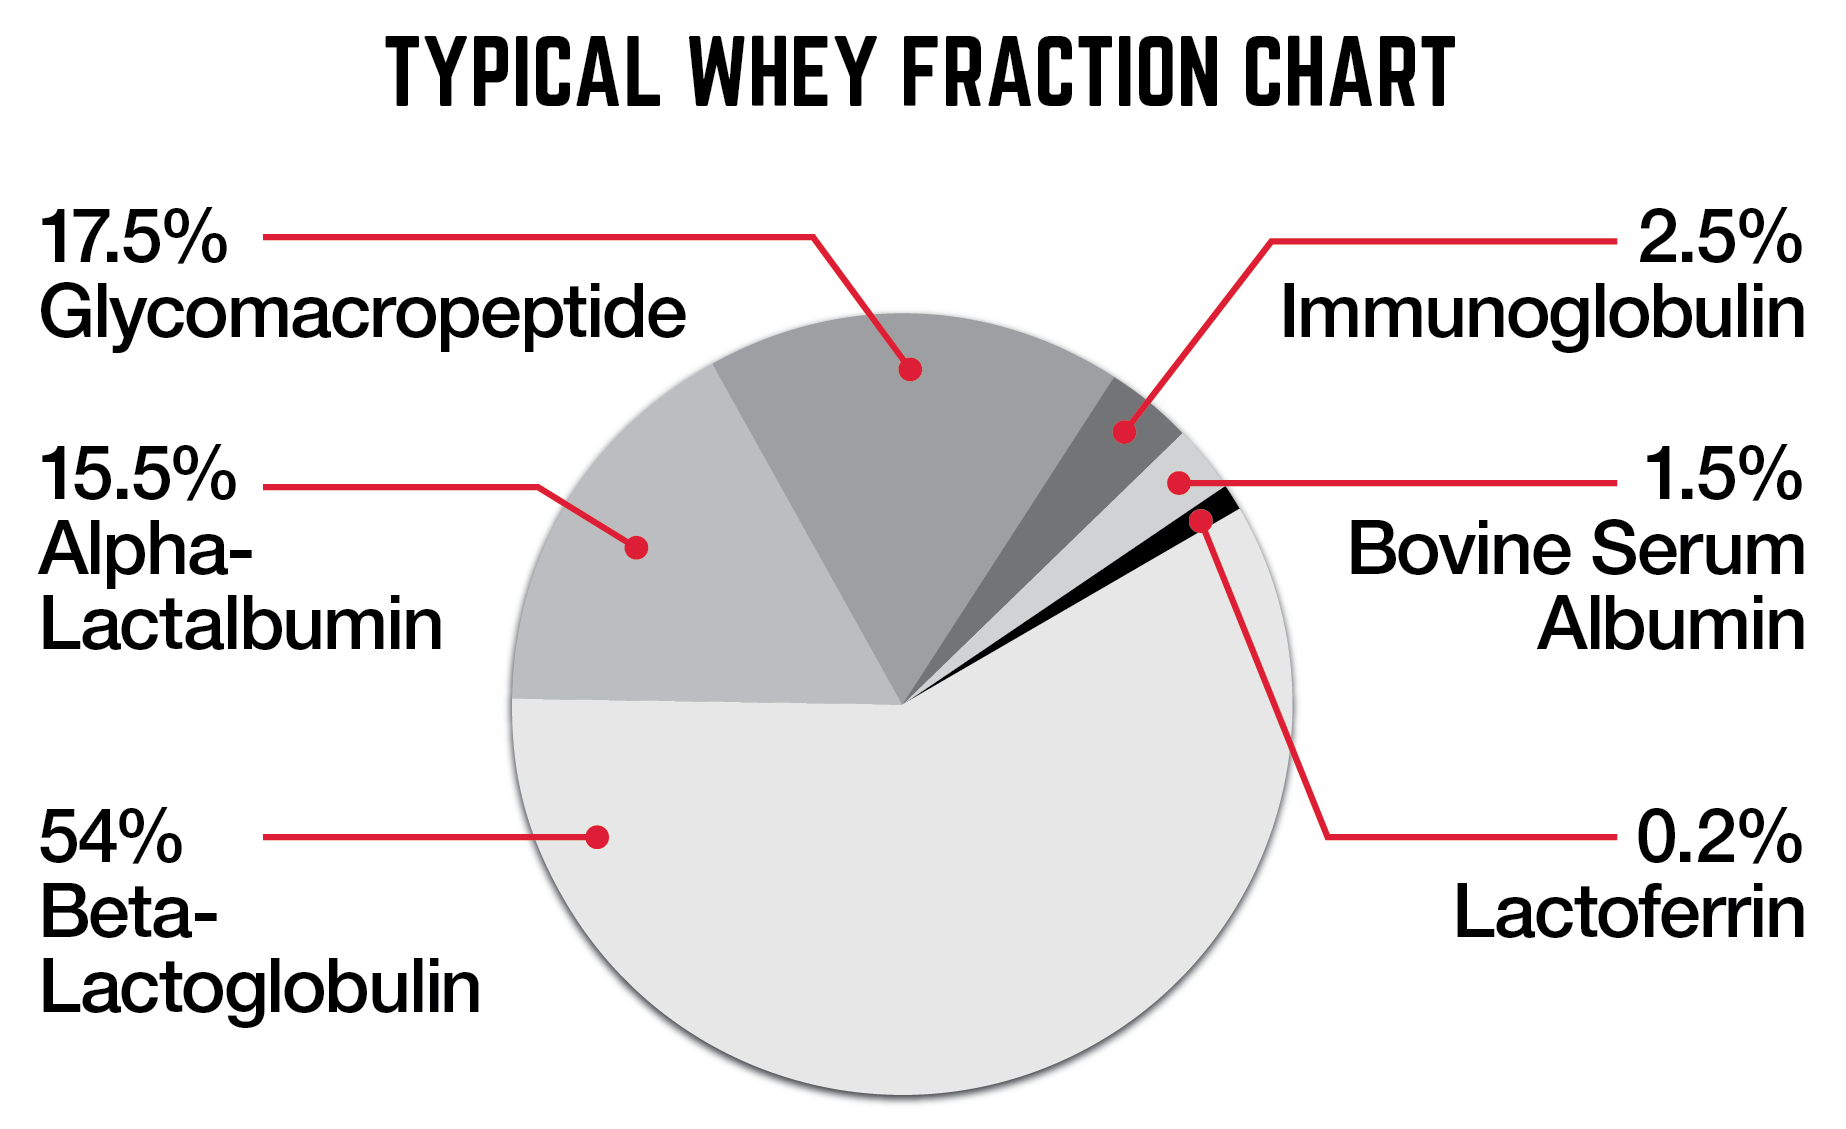 CREED Whey Protein Isolate Bioactive Whey Fractions